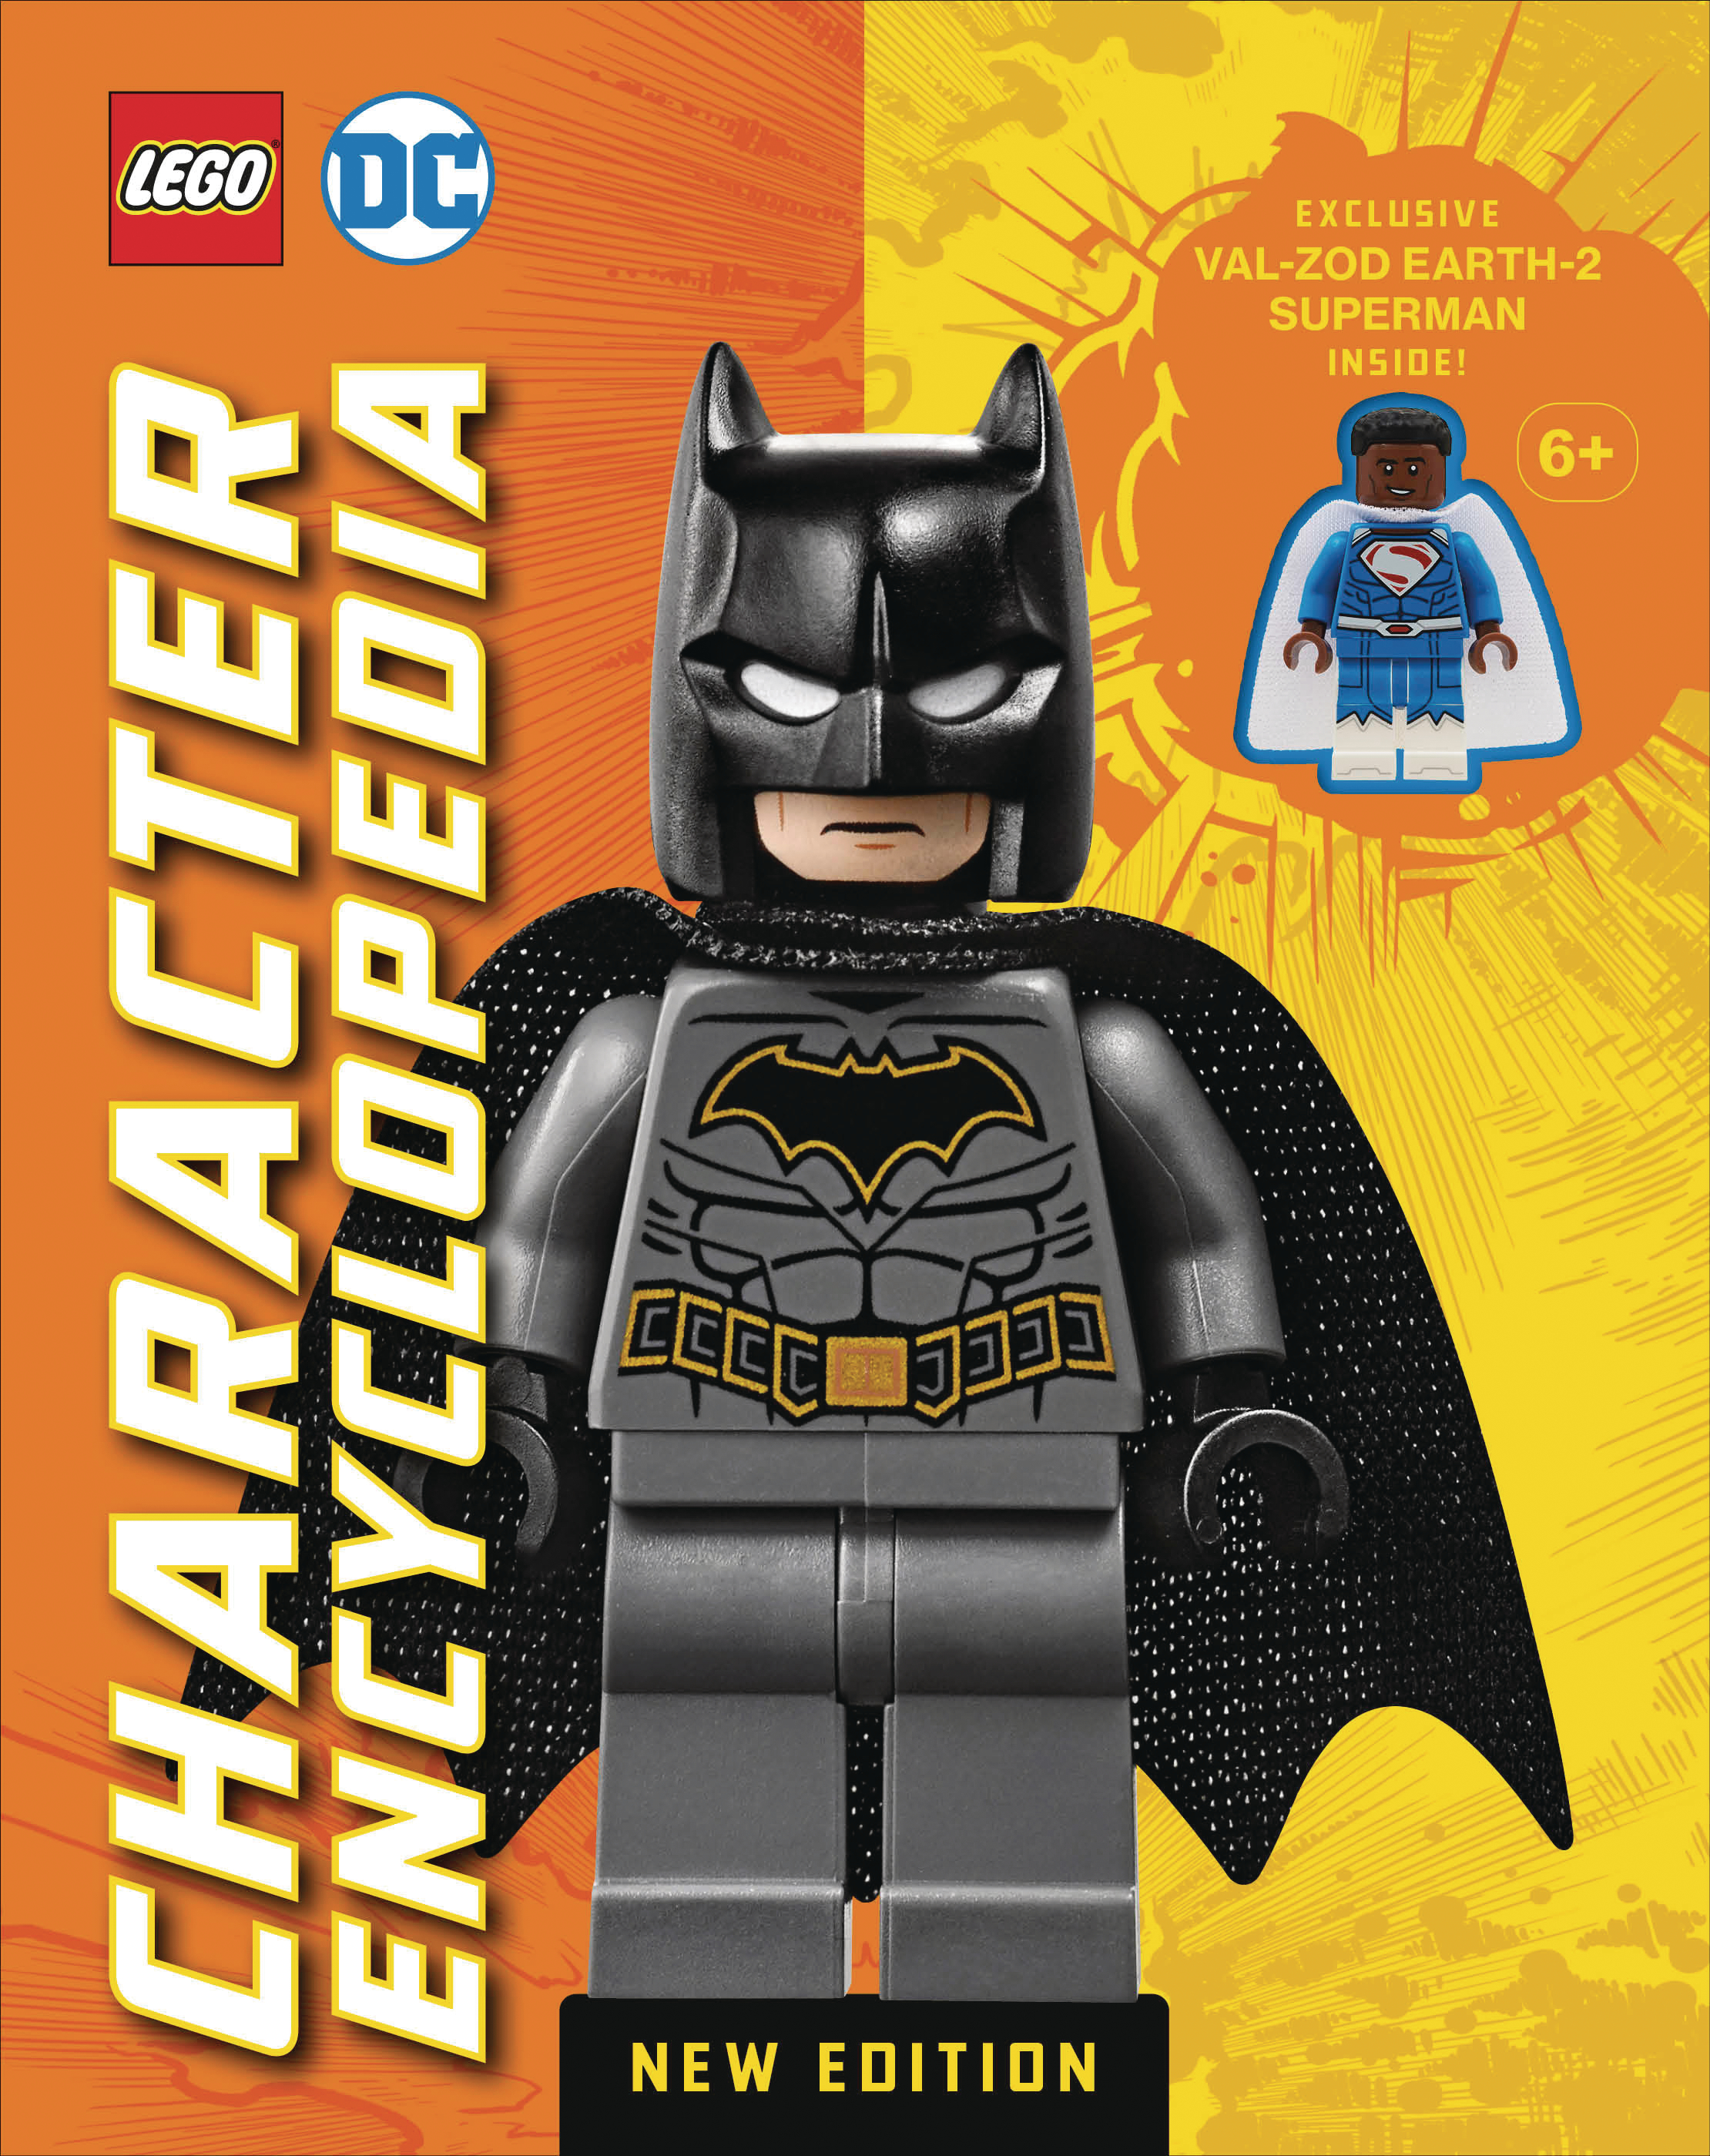 Lego DC Character Encyclopedia New Edition With Minifigure